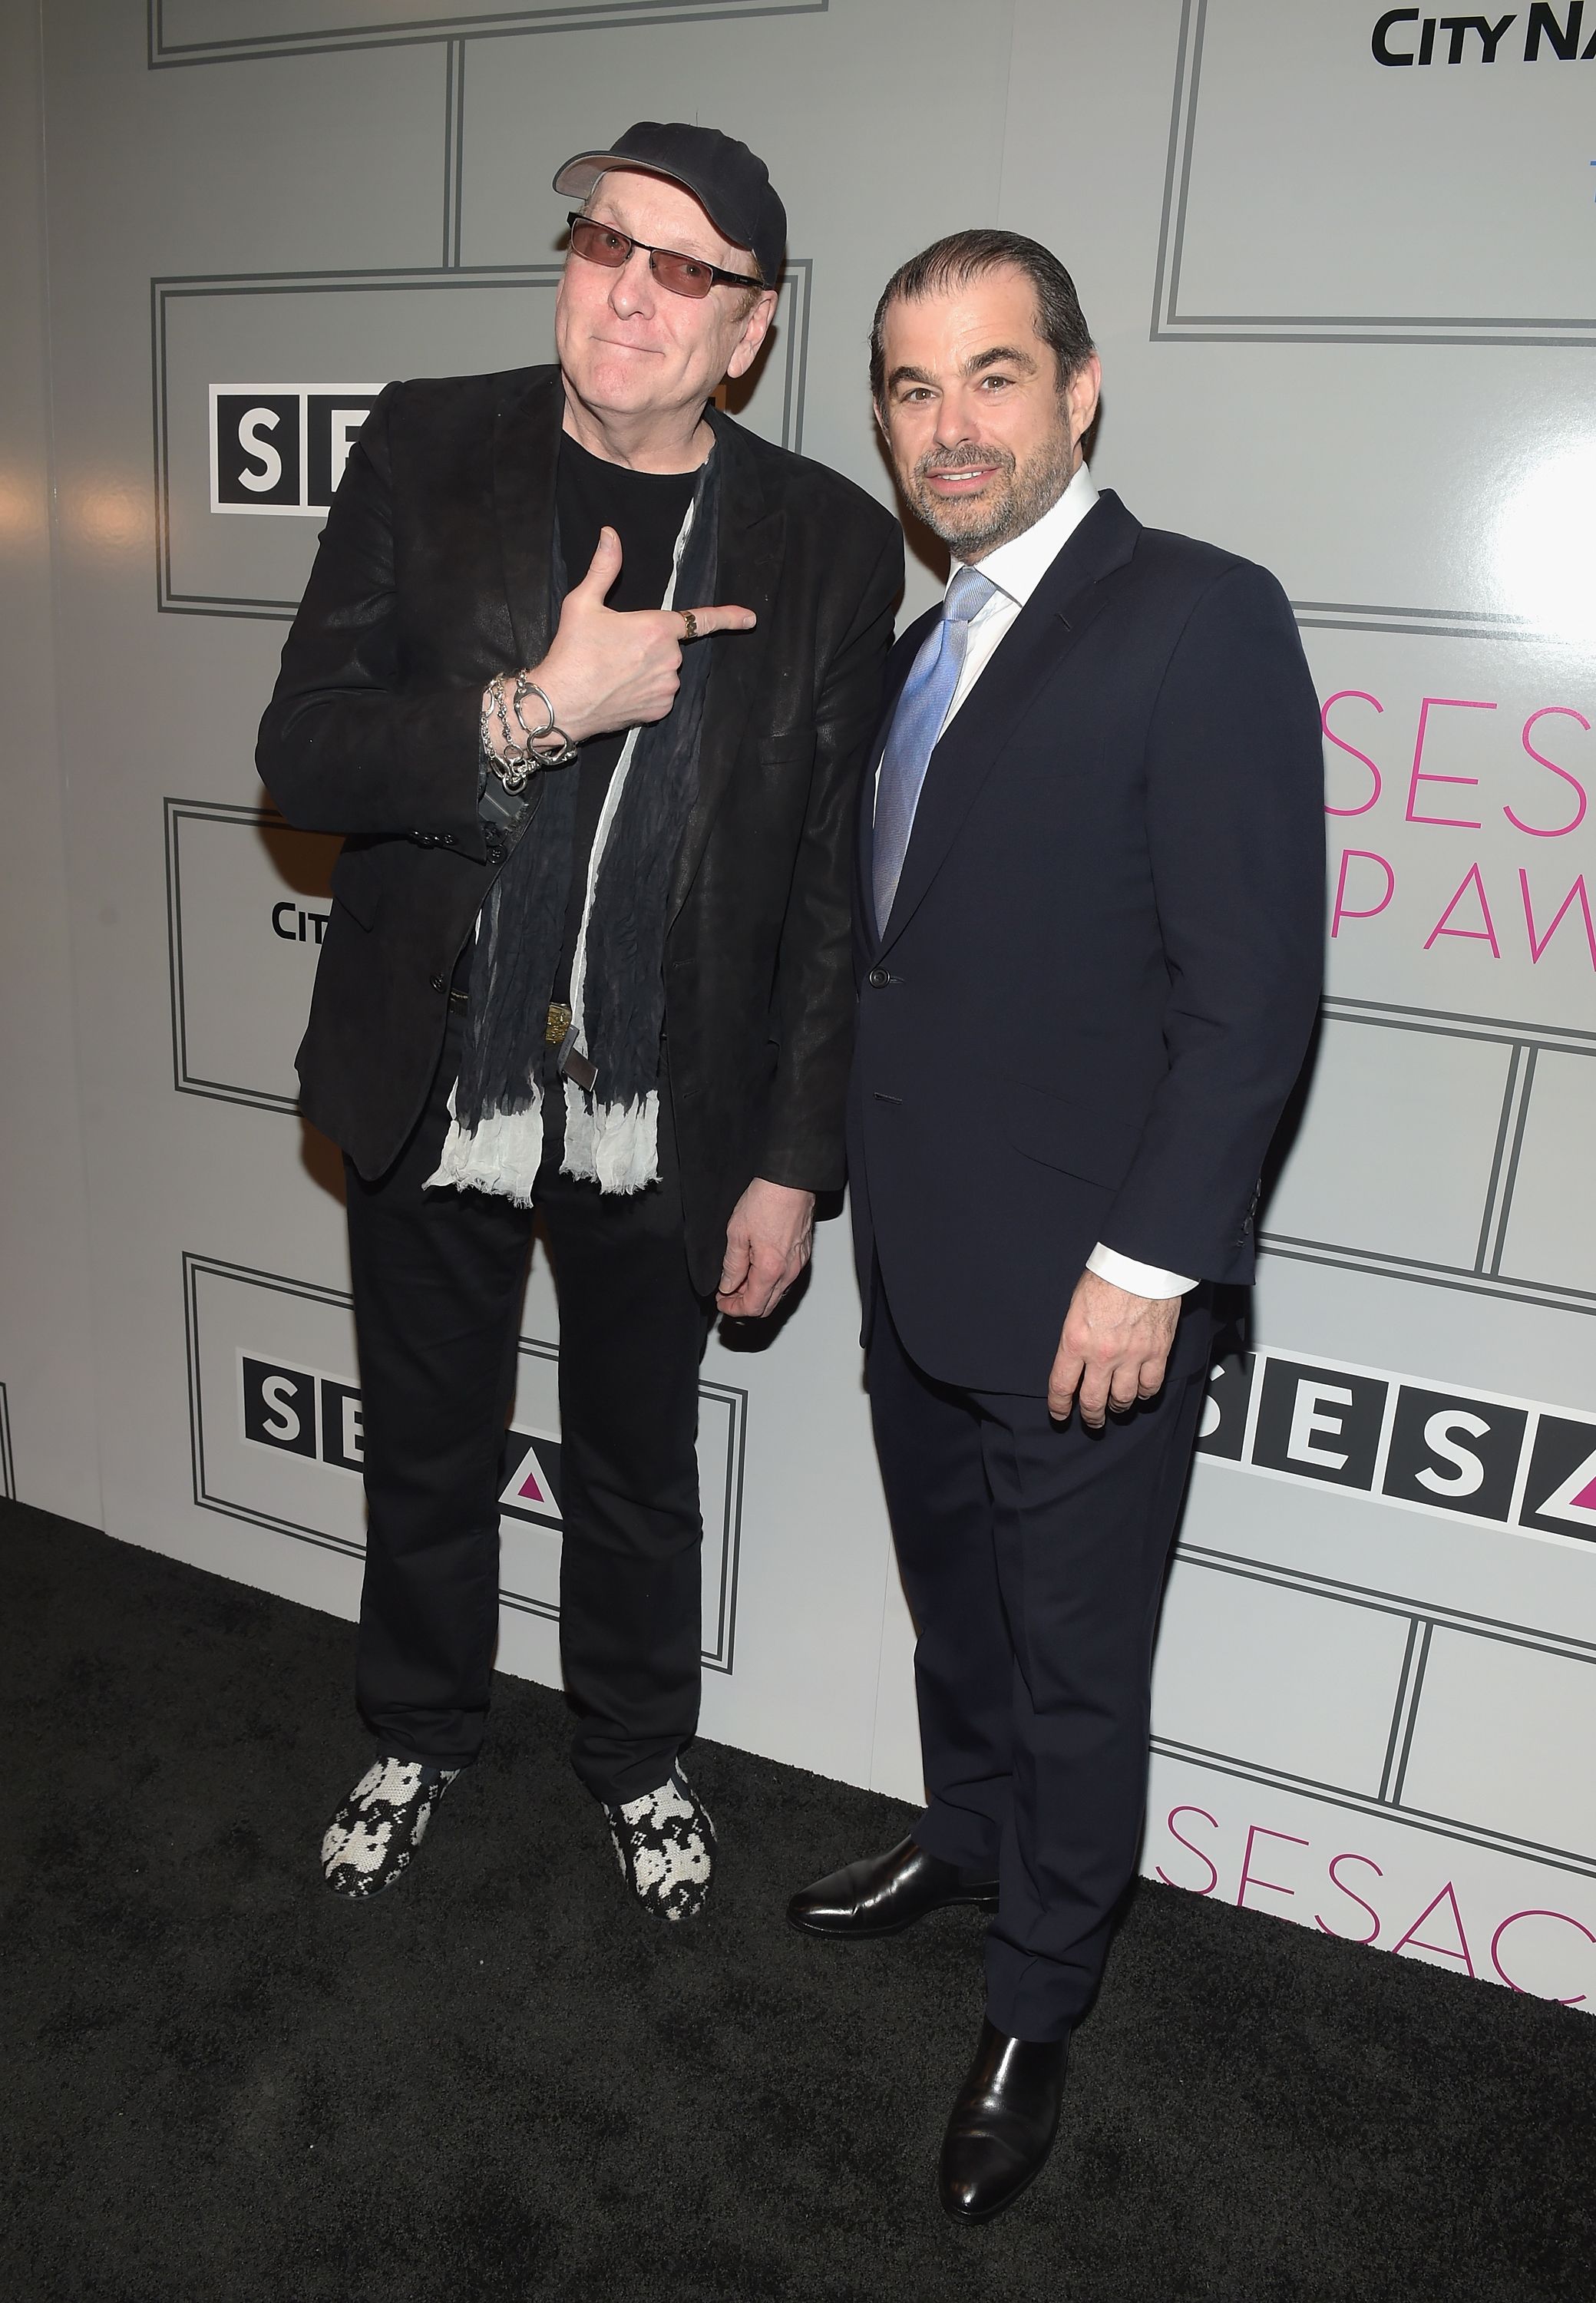 Guitarist Rick Nielsen of Cheap Trick (L) and Chairmain and CEO of SESAC John Josephson attends the 2017 SESAC Pop Awards on April 13, 2017 in New York City. (Photo by Jason Kempin/Getty Images for SESAC)